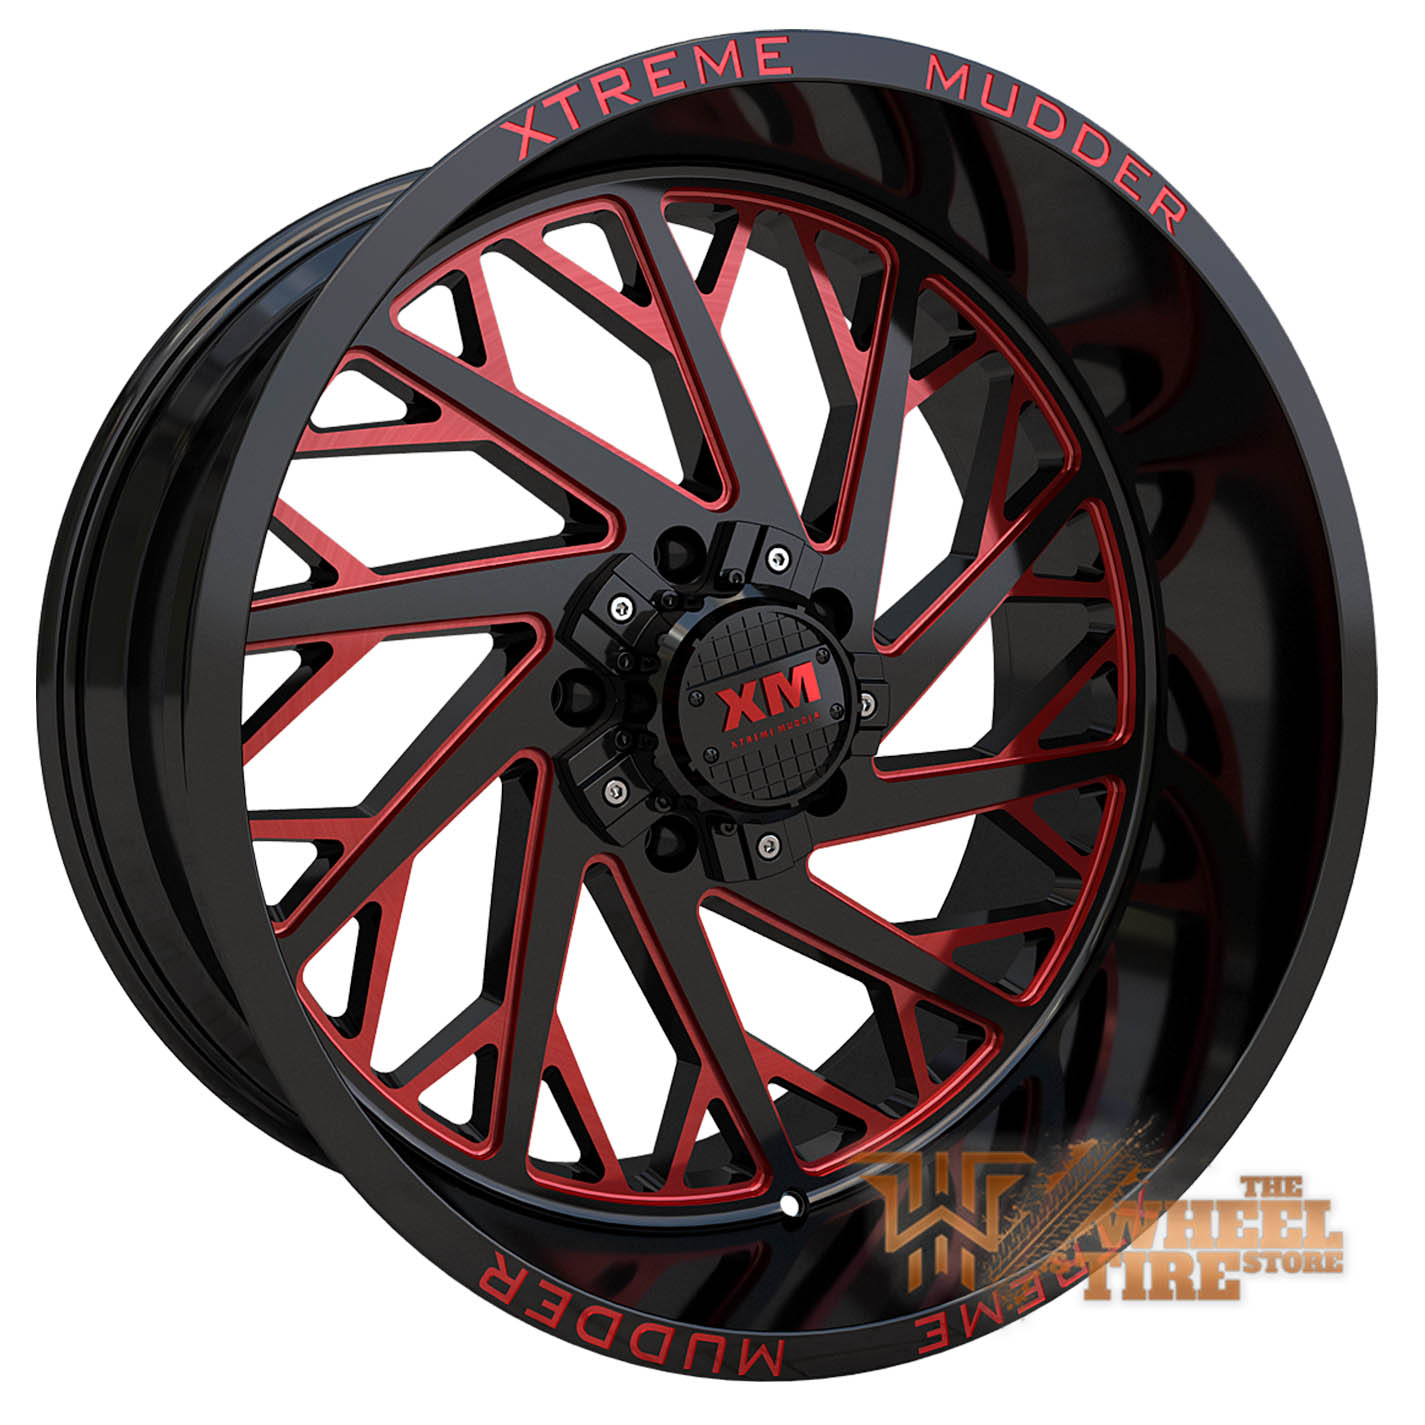 XTREME MUDDER XM-400 Wheel in Gloss Black Red Milled (Set of 4)